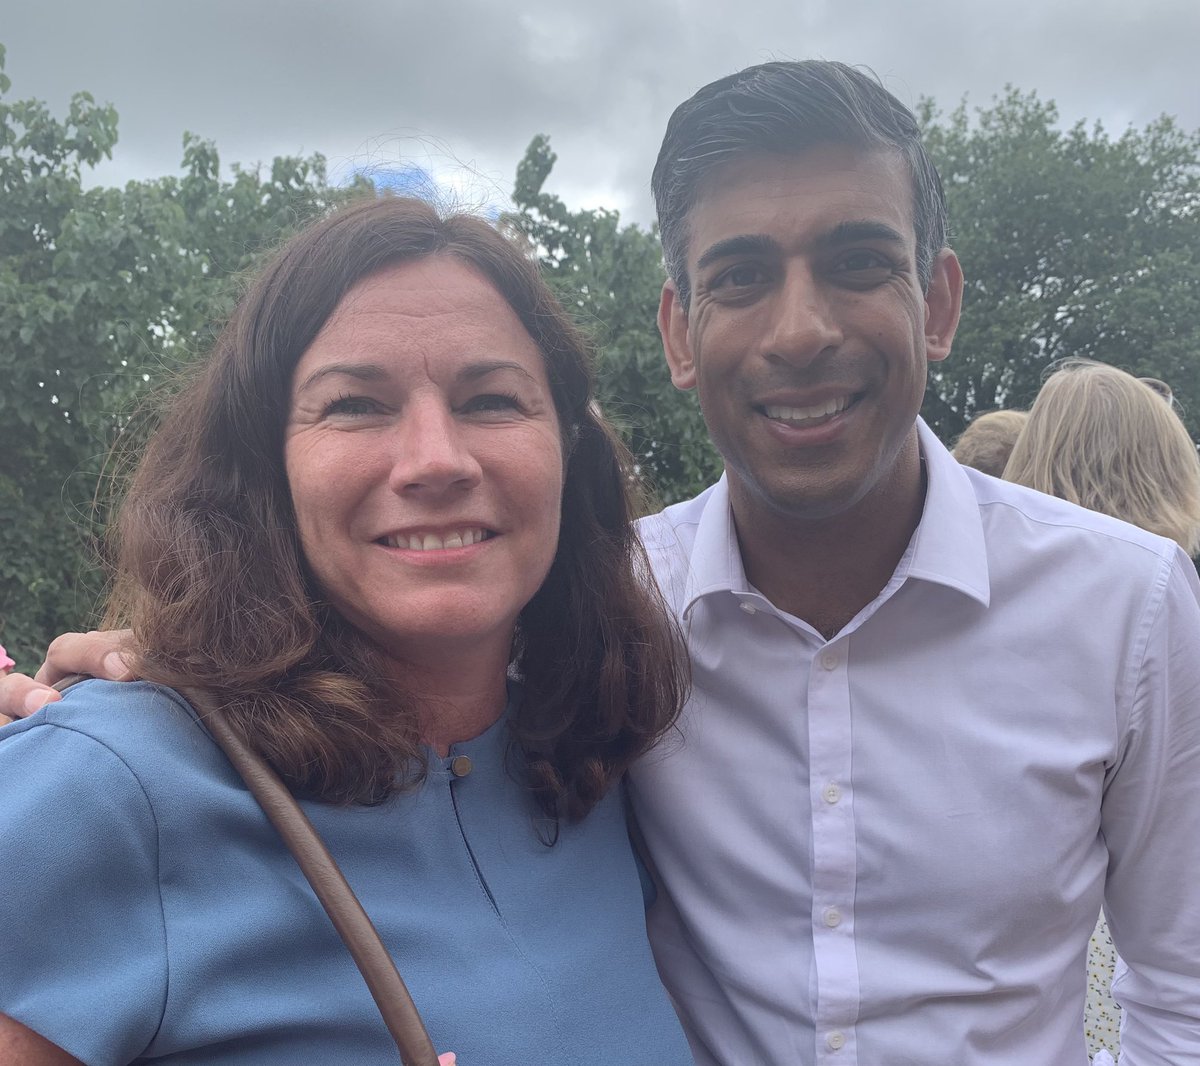 Thanks @Laura__Farris & @WestBerksTories for opportunity to hear from @RishiSunak I have given much deliberation to my choice for PM. After hearing his plans for Education, support for vulnerable & knowledge of the pressures facing #localgov he has my vote #ReadyForRishi